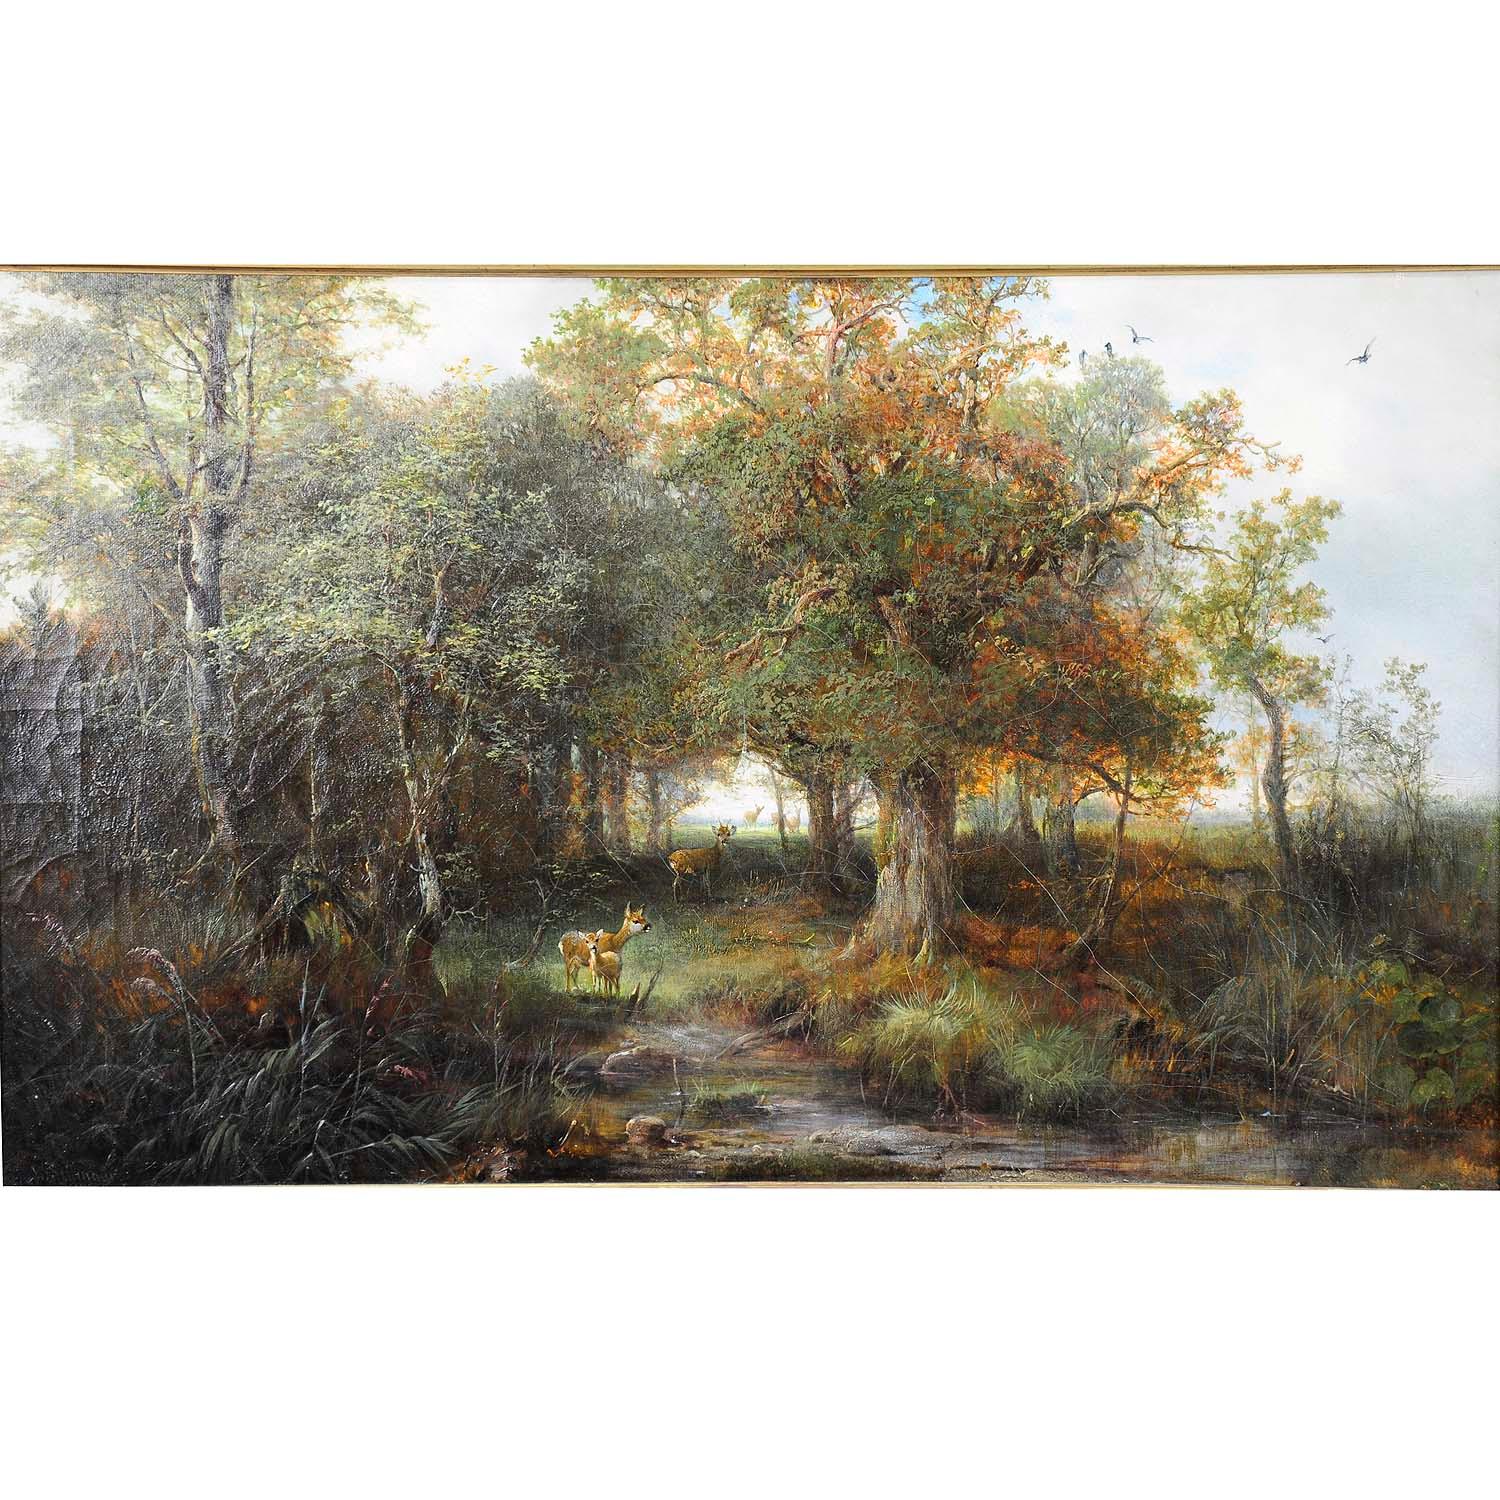 A naturalistic oil painting depicting a deer family in the forest. Oil on canvas by Ludwig Sellmayr (Munich 1834 - 1901). Framed with antique richly decorated and gilded frame. Signed on the lower left.

Measures: width: 32.28